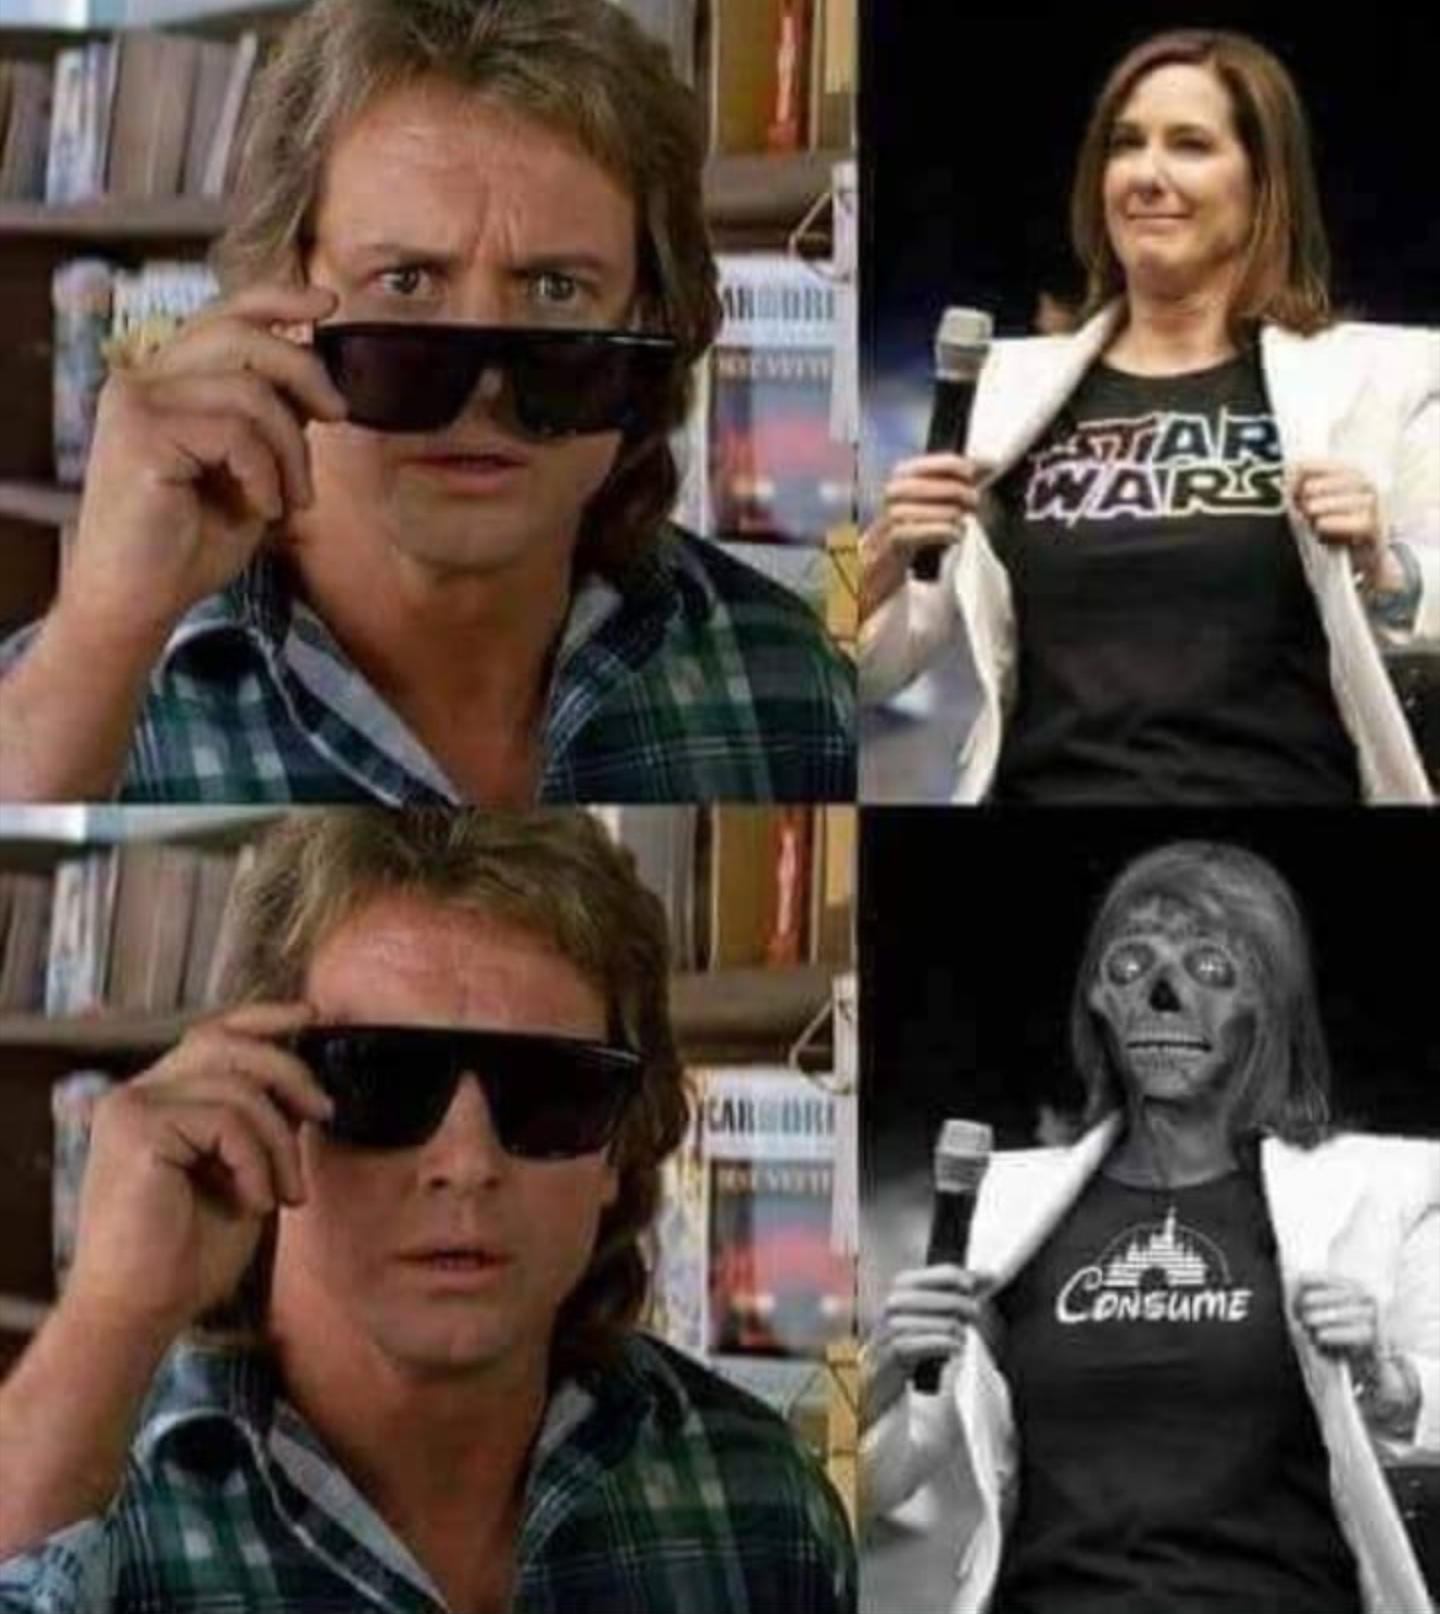 they live meme - Star Warse Consume